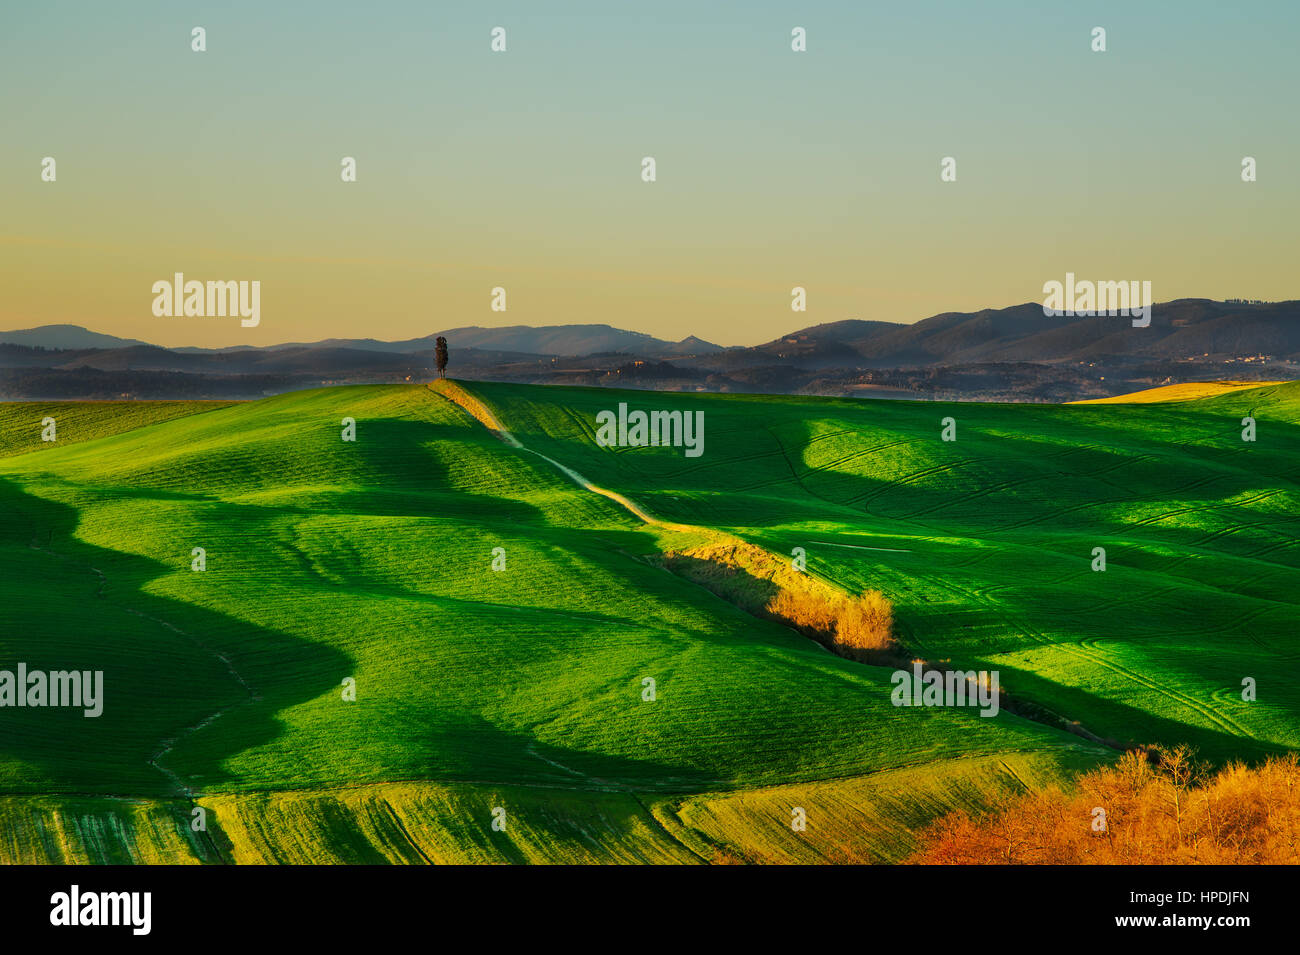 Tuscany country rolling hills landscape, hilltop cypress tree and green fields on sunset. Siena, Crete Senesi. Italy, Europe. Stock Photo